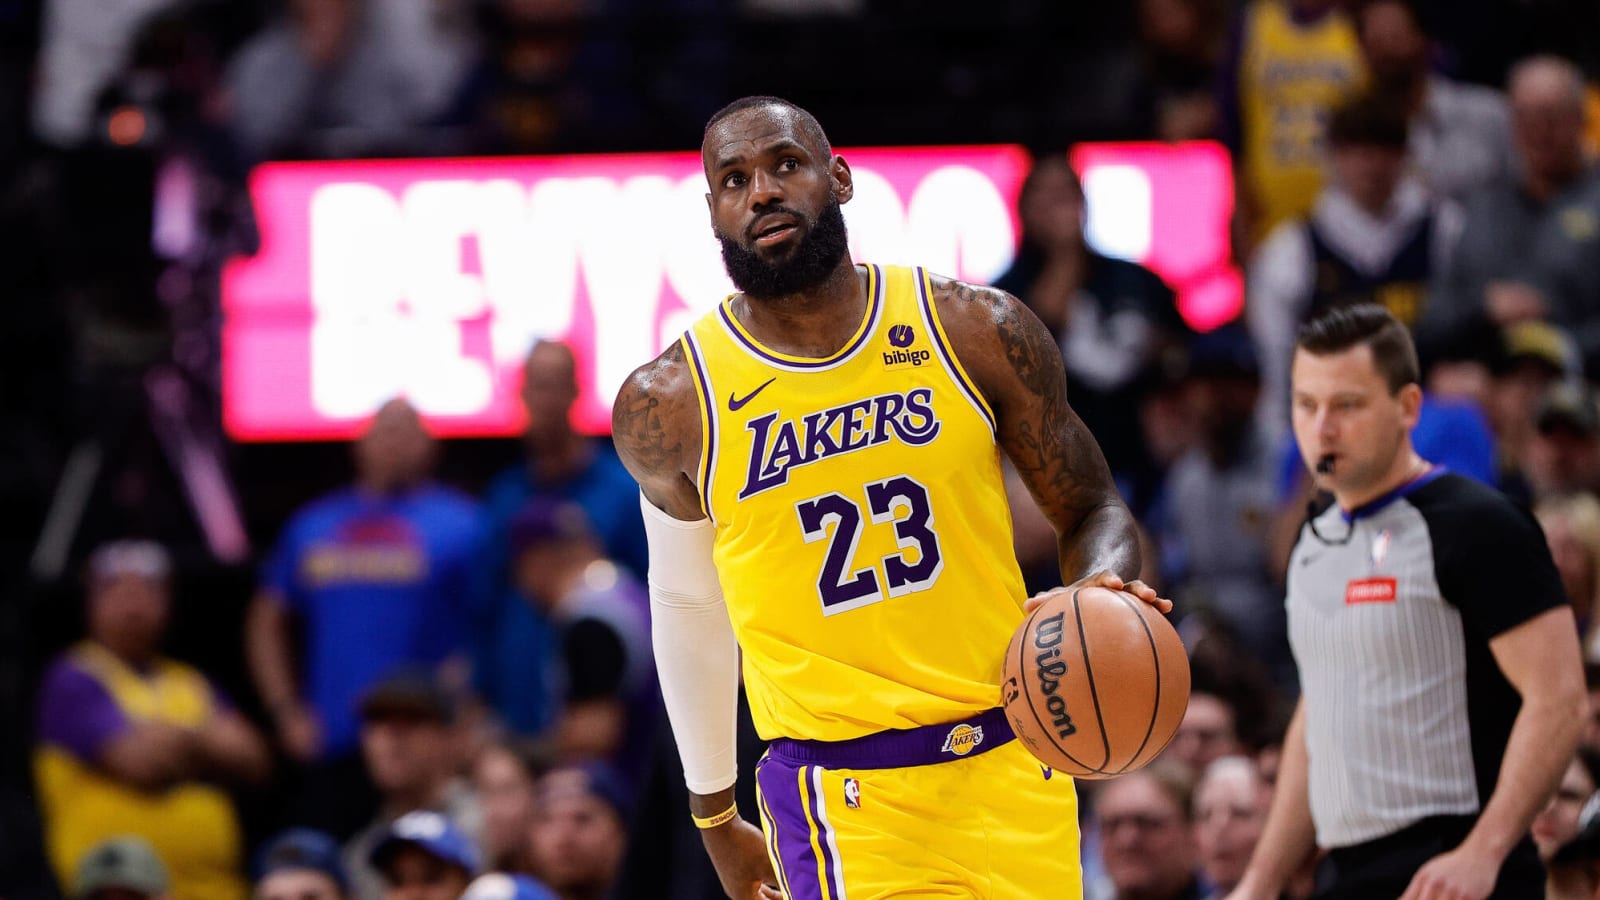 Watch: Video shows LeBron James hijacking Darvin Ham’s coaching job and drawing plays for Lakers during game